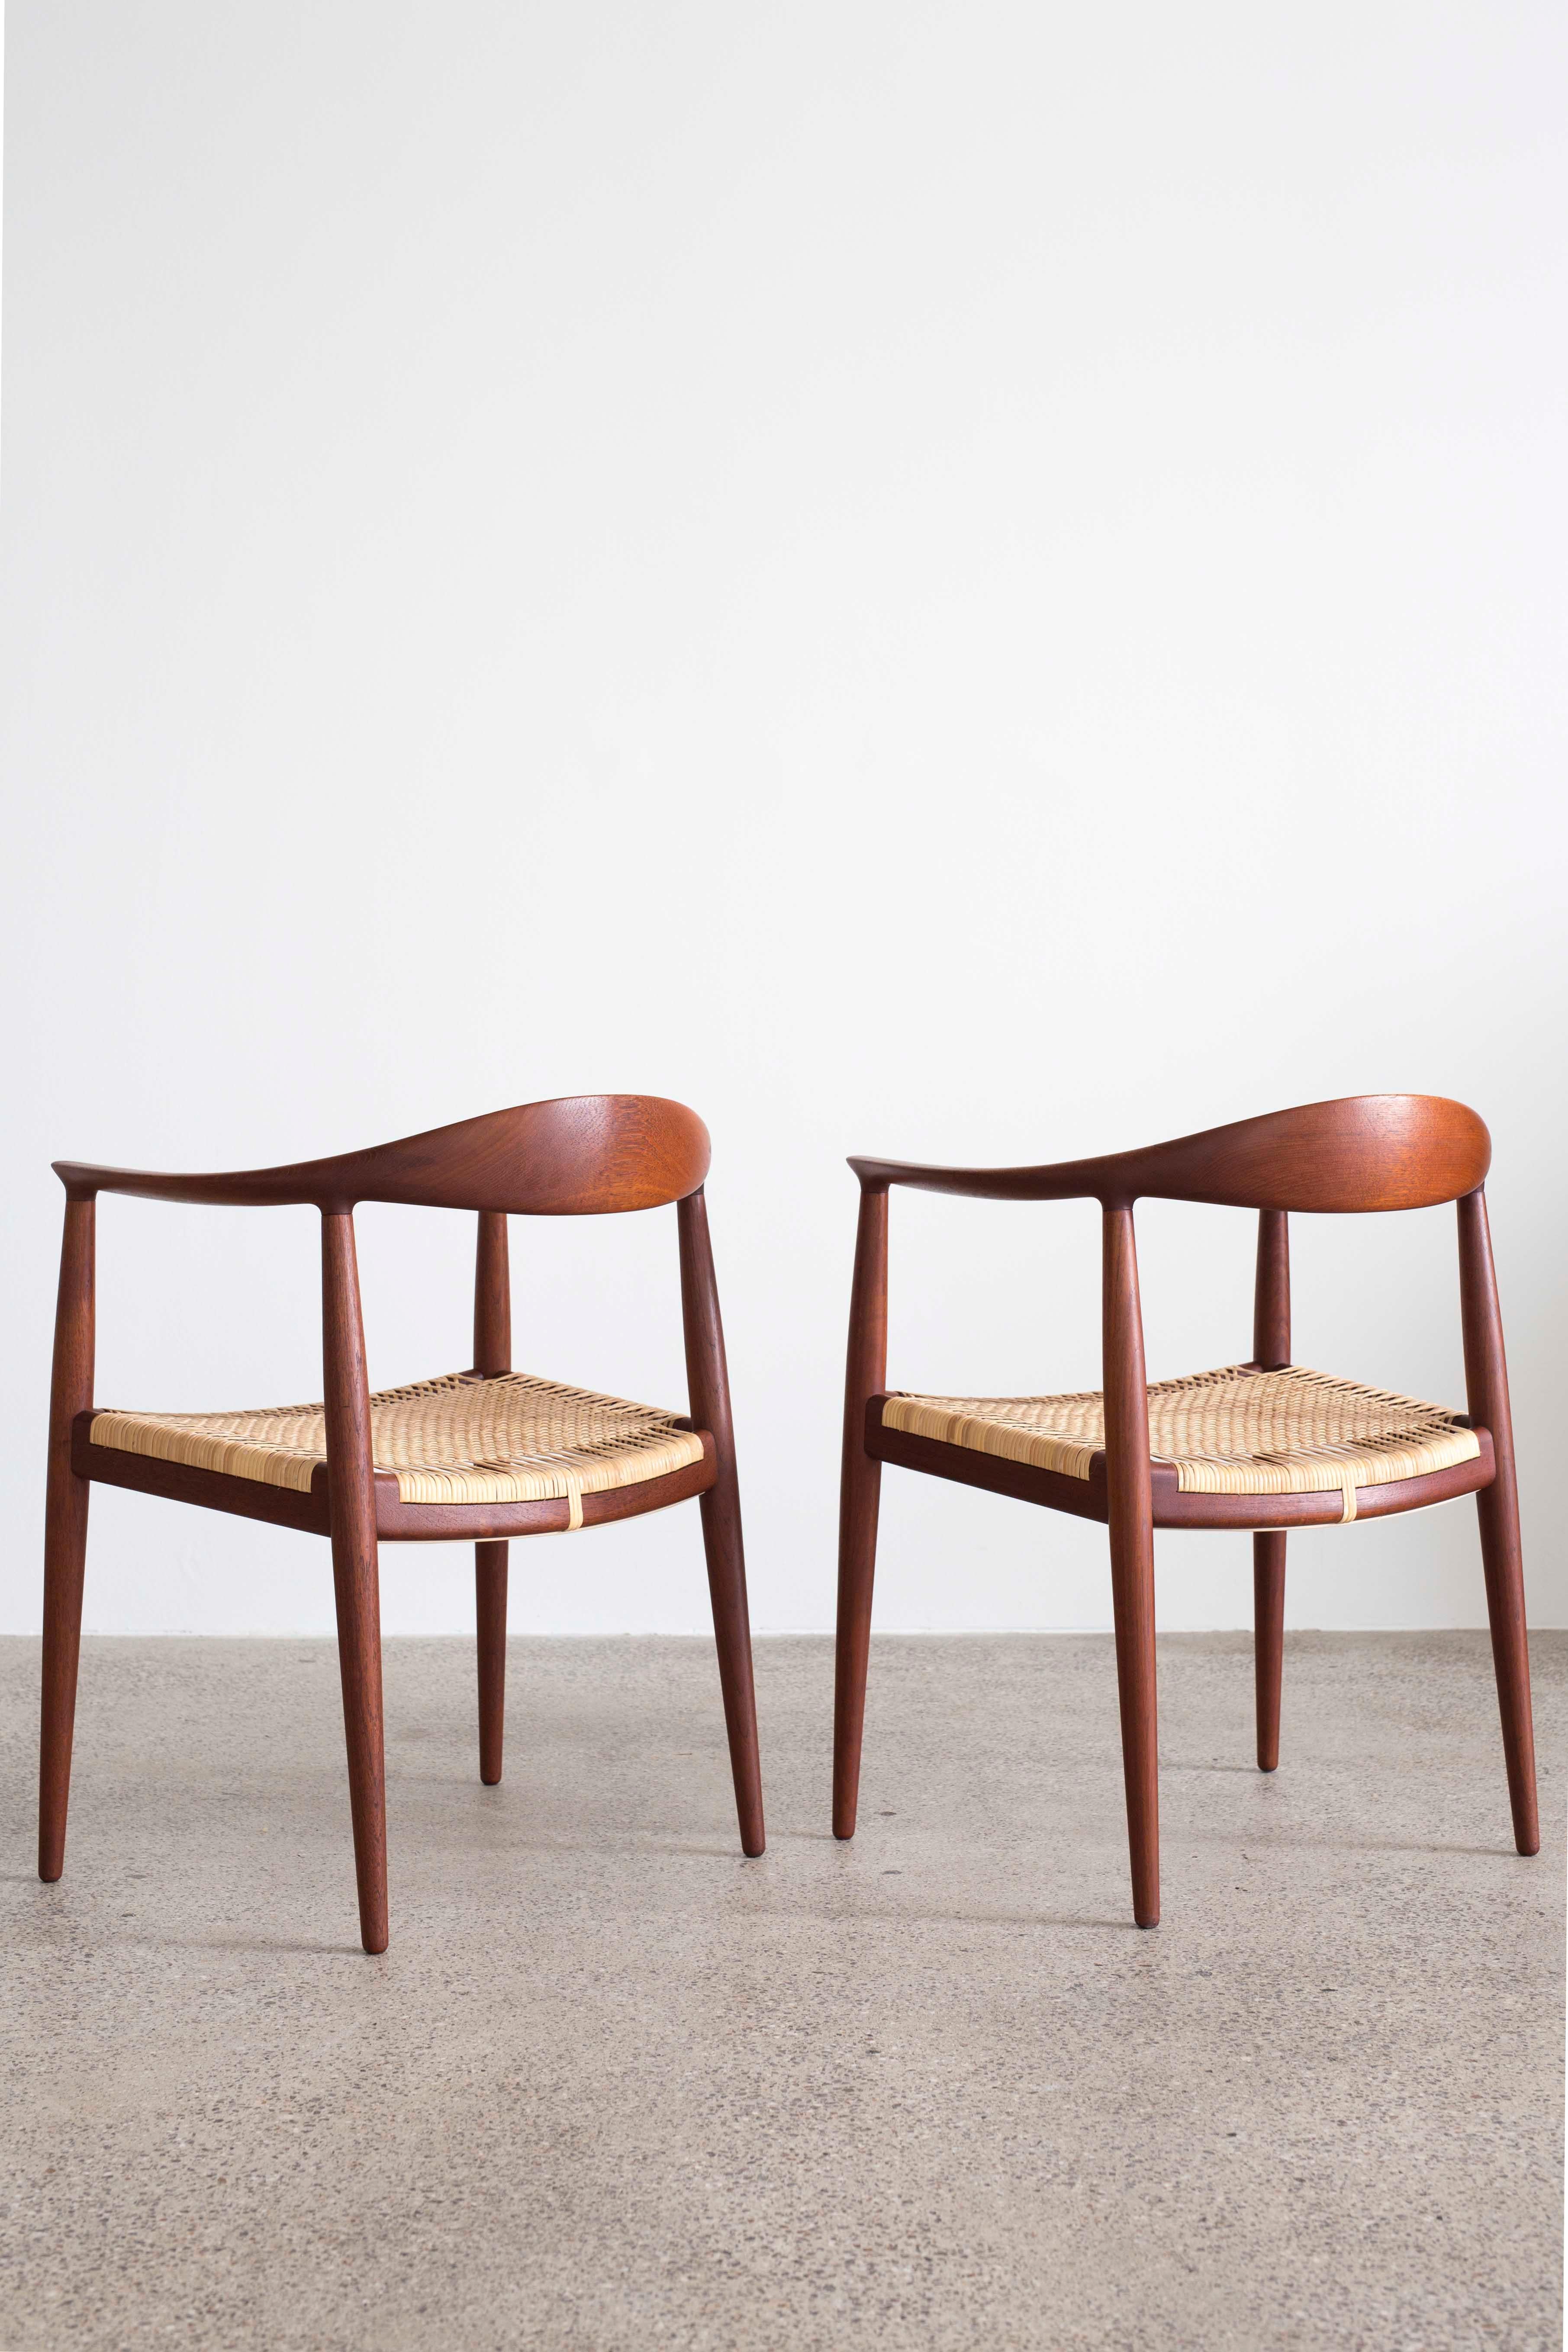 A pair of Hans J. Wegner 'The chair'.
Frame of teak with cane seat.
Designed by Hans J. Wegner 1949 and manufactured and marked by Cabinetmaker Johannes Hansen, Denmark.